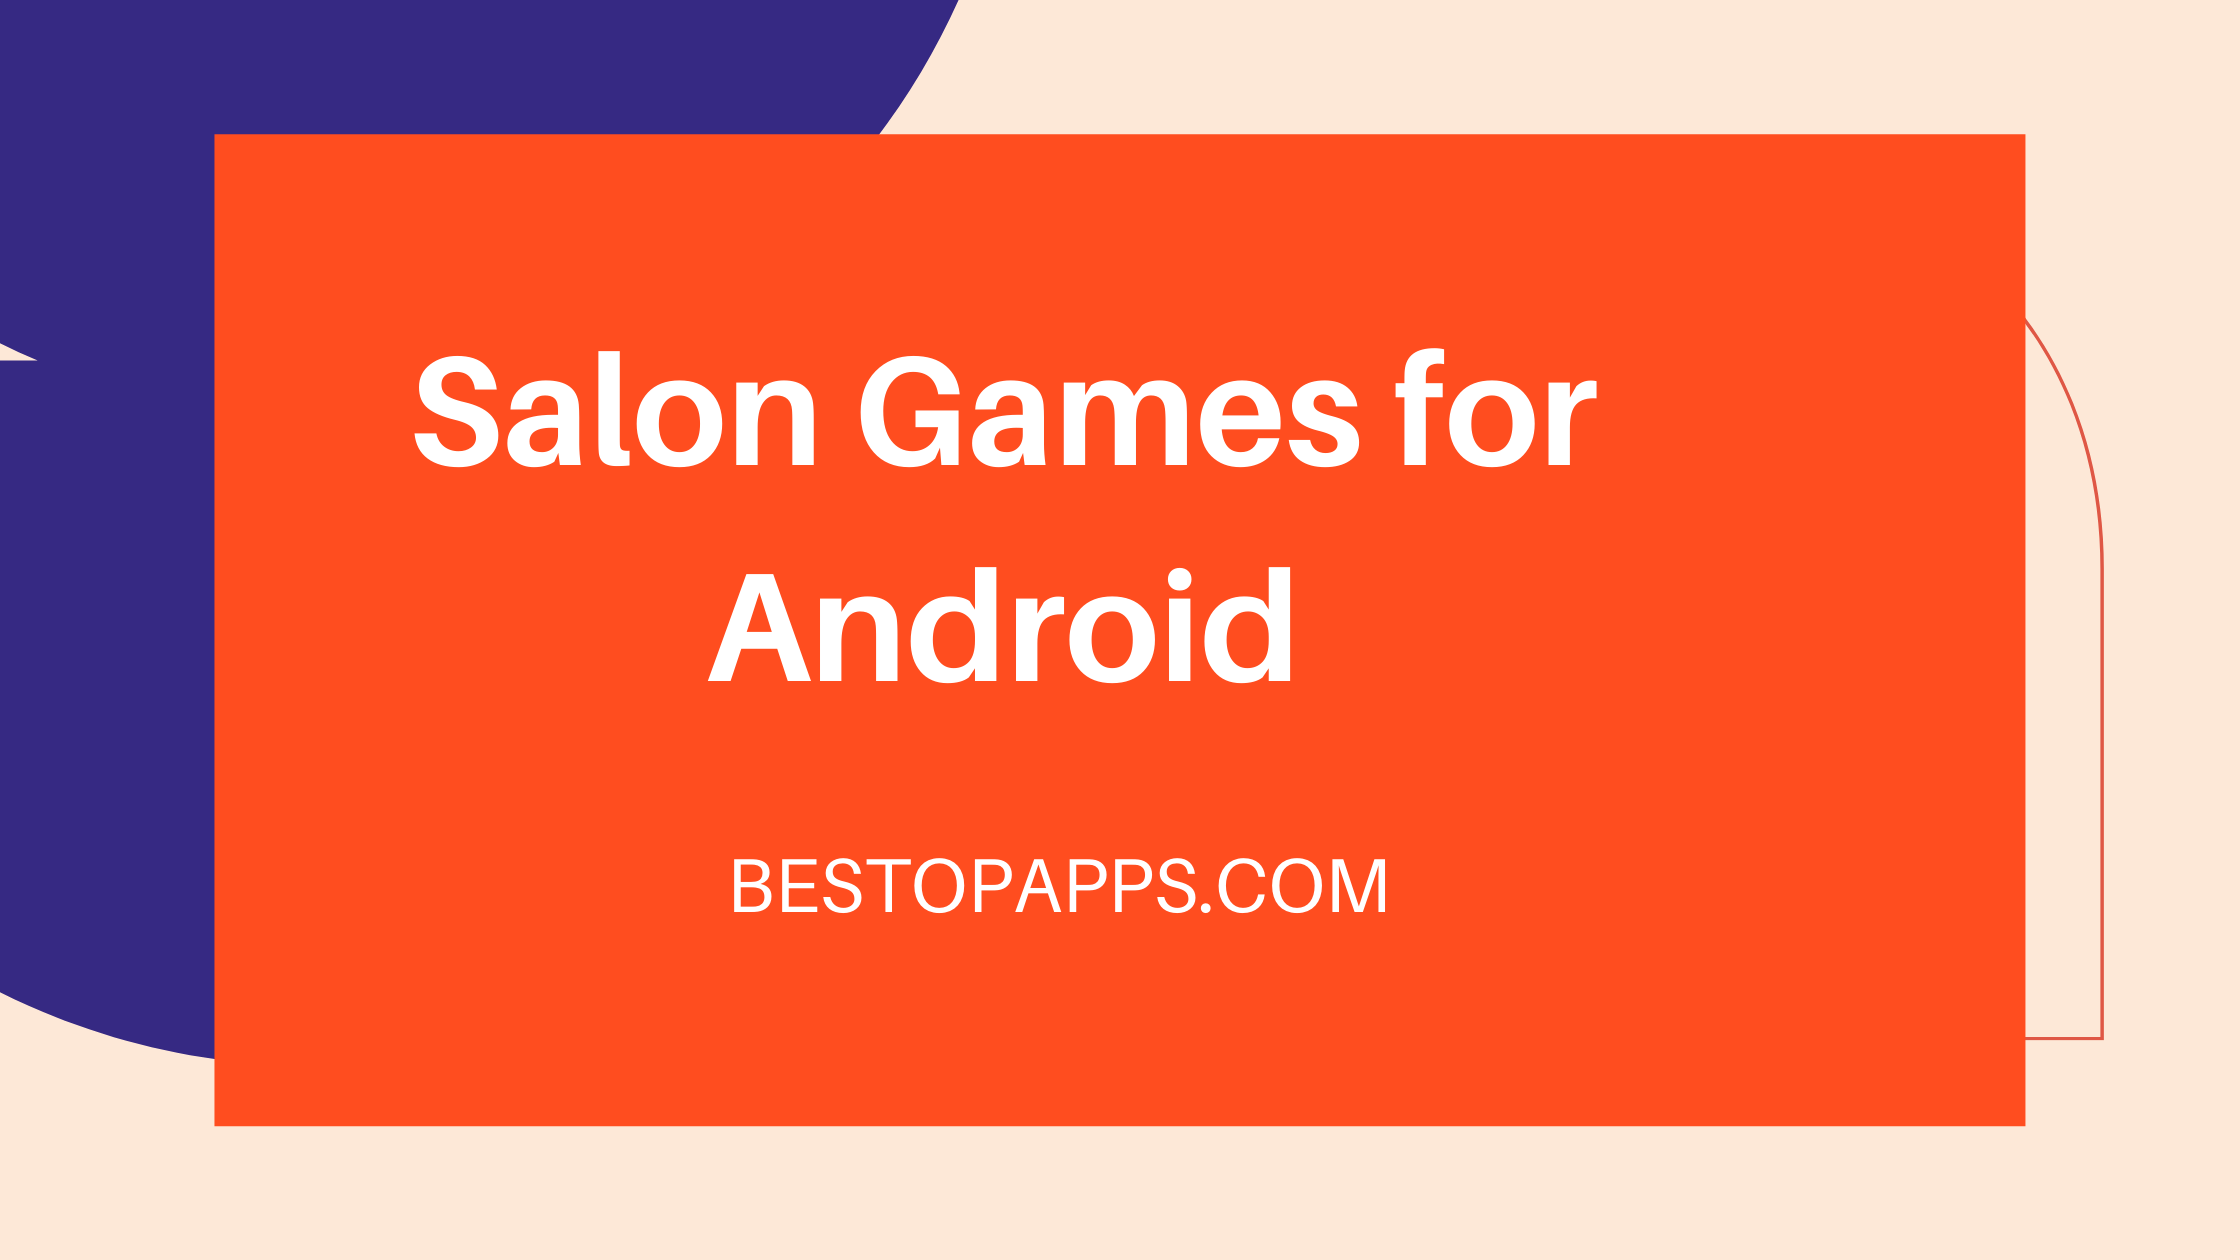 Salon Games for Android